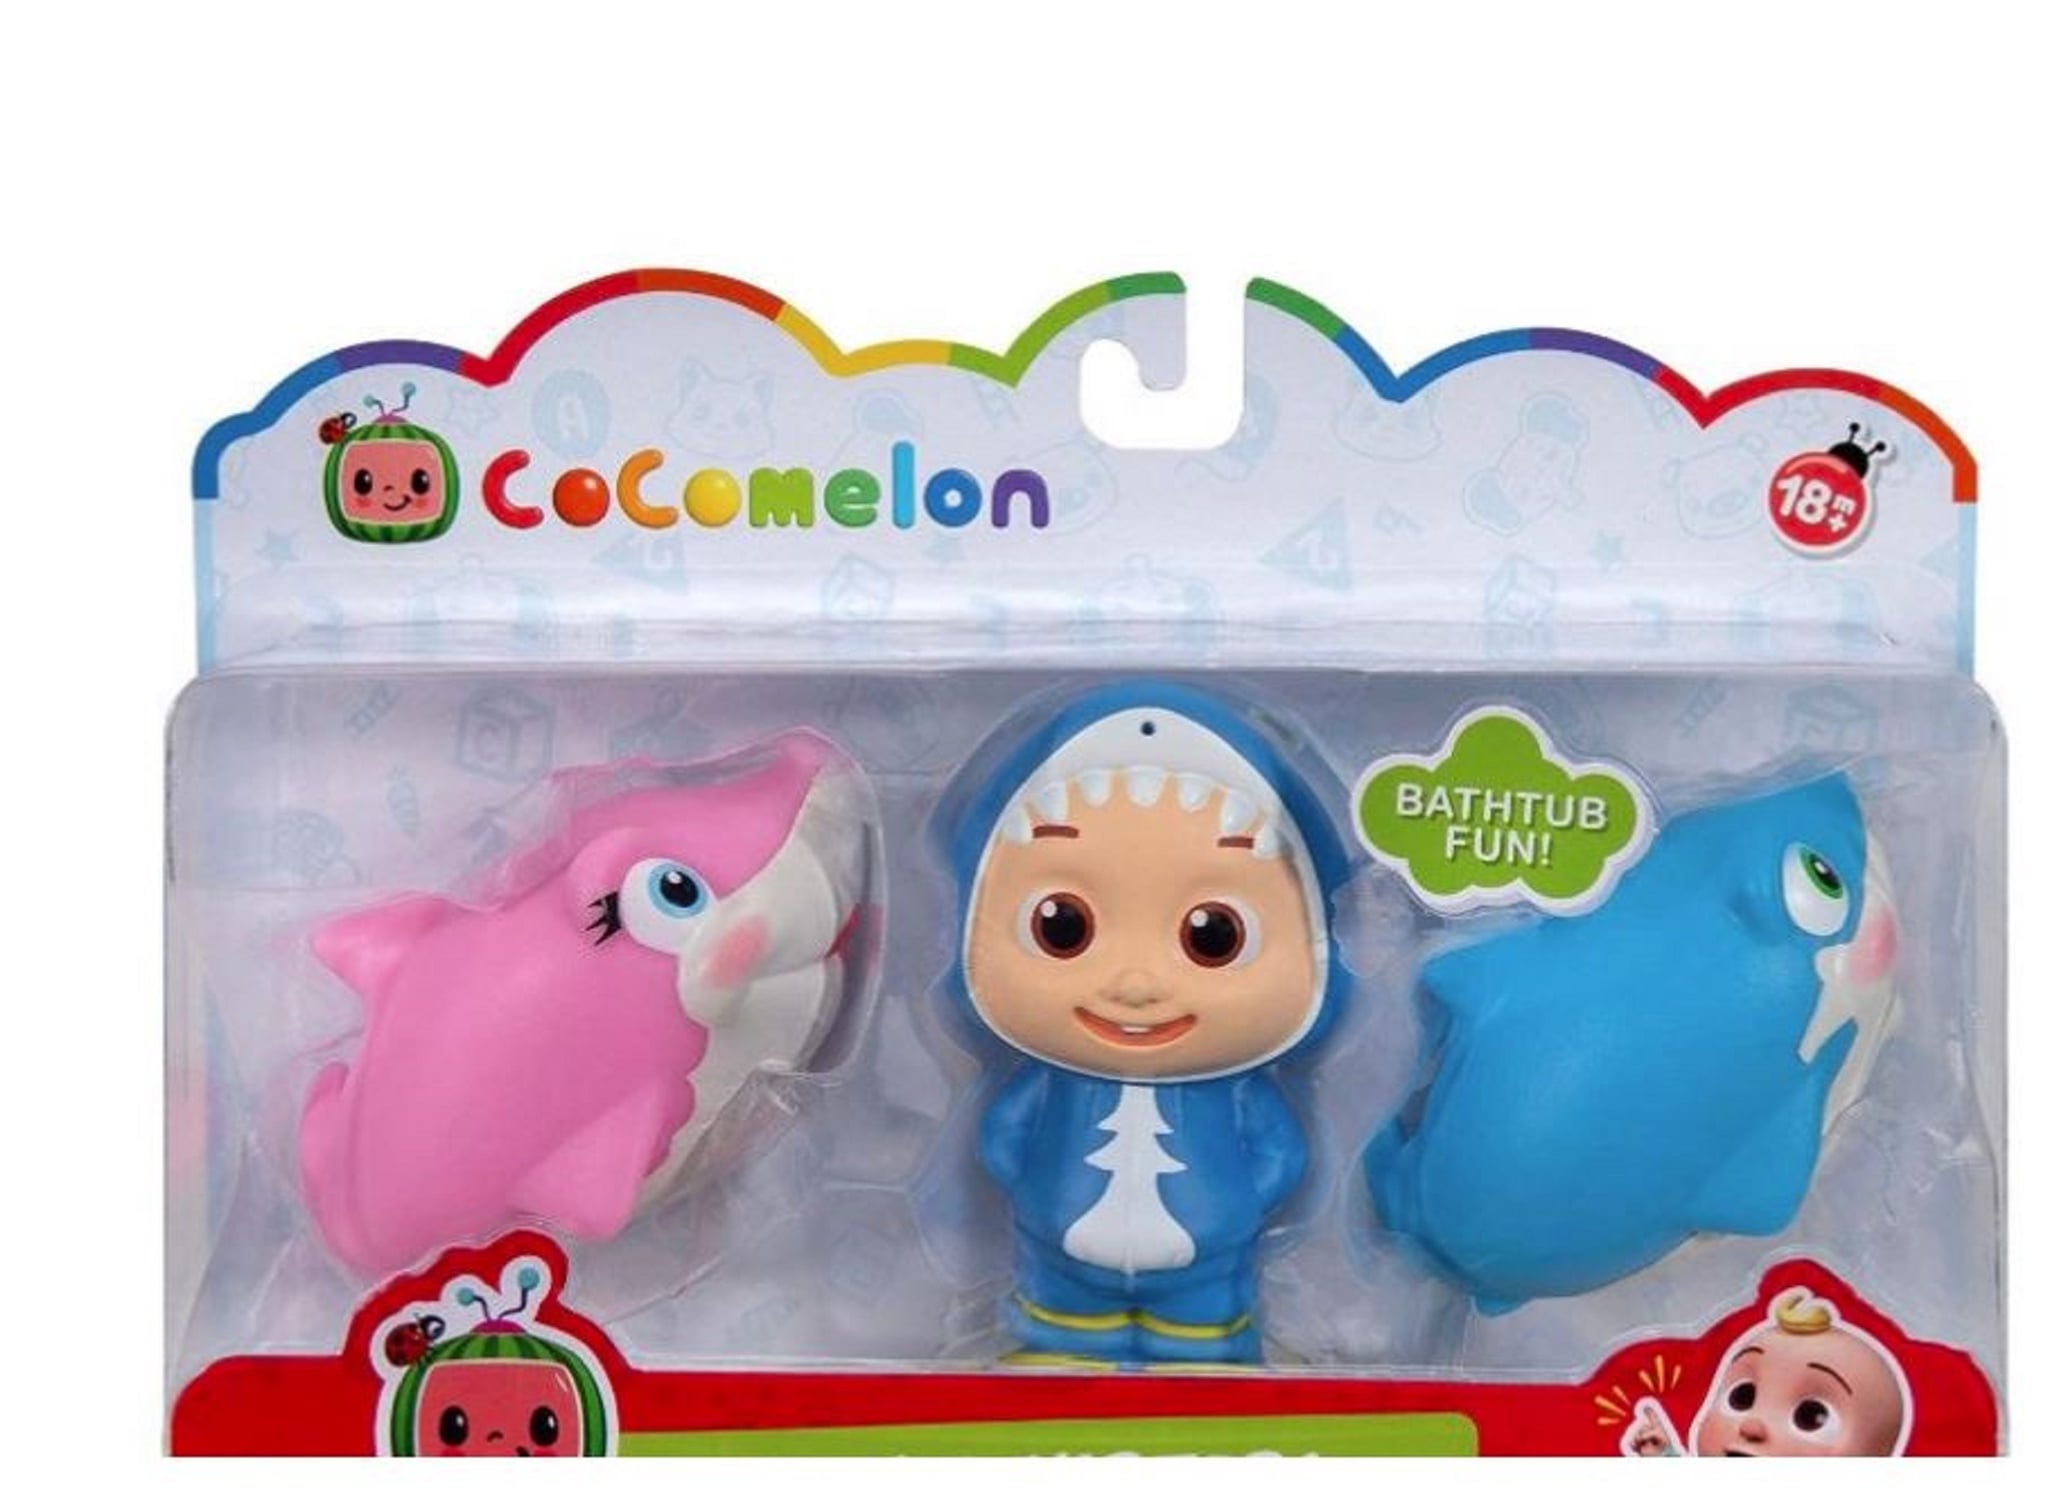 Cocomelon Toys Clothes Blankets And More For Toddlers Popsugar Family